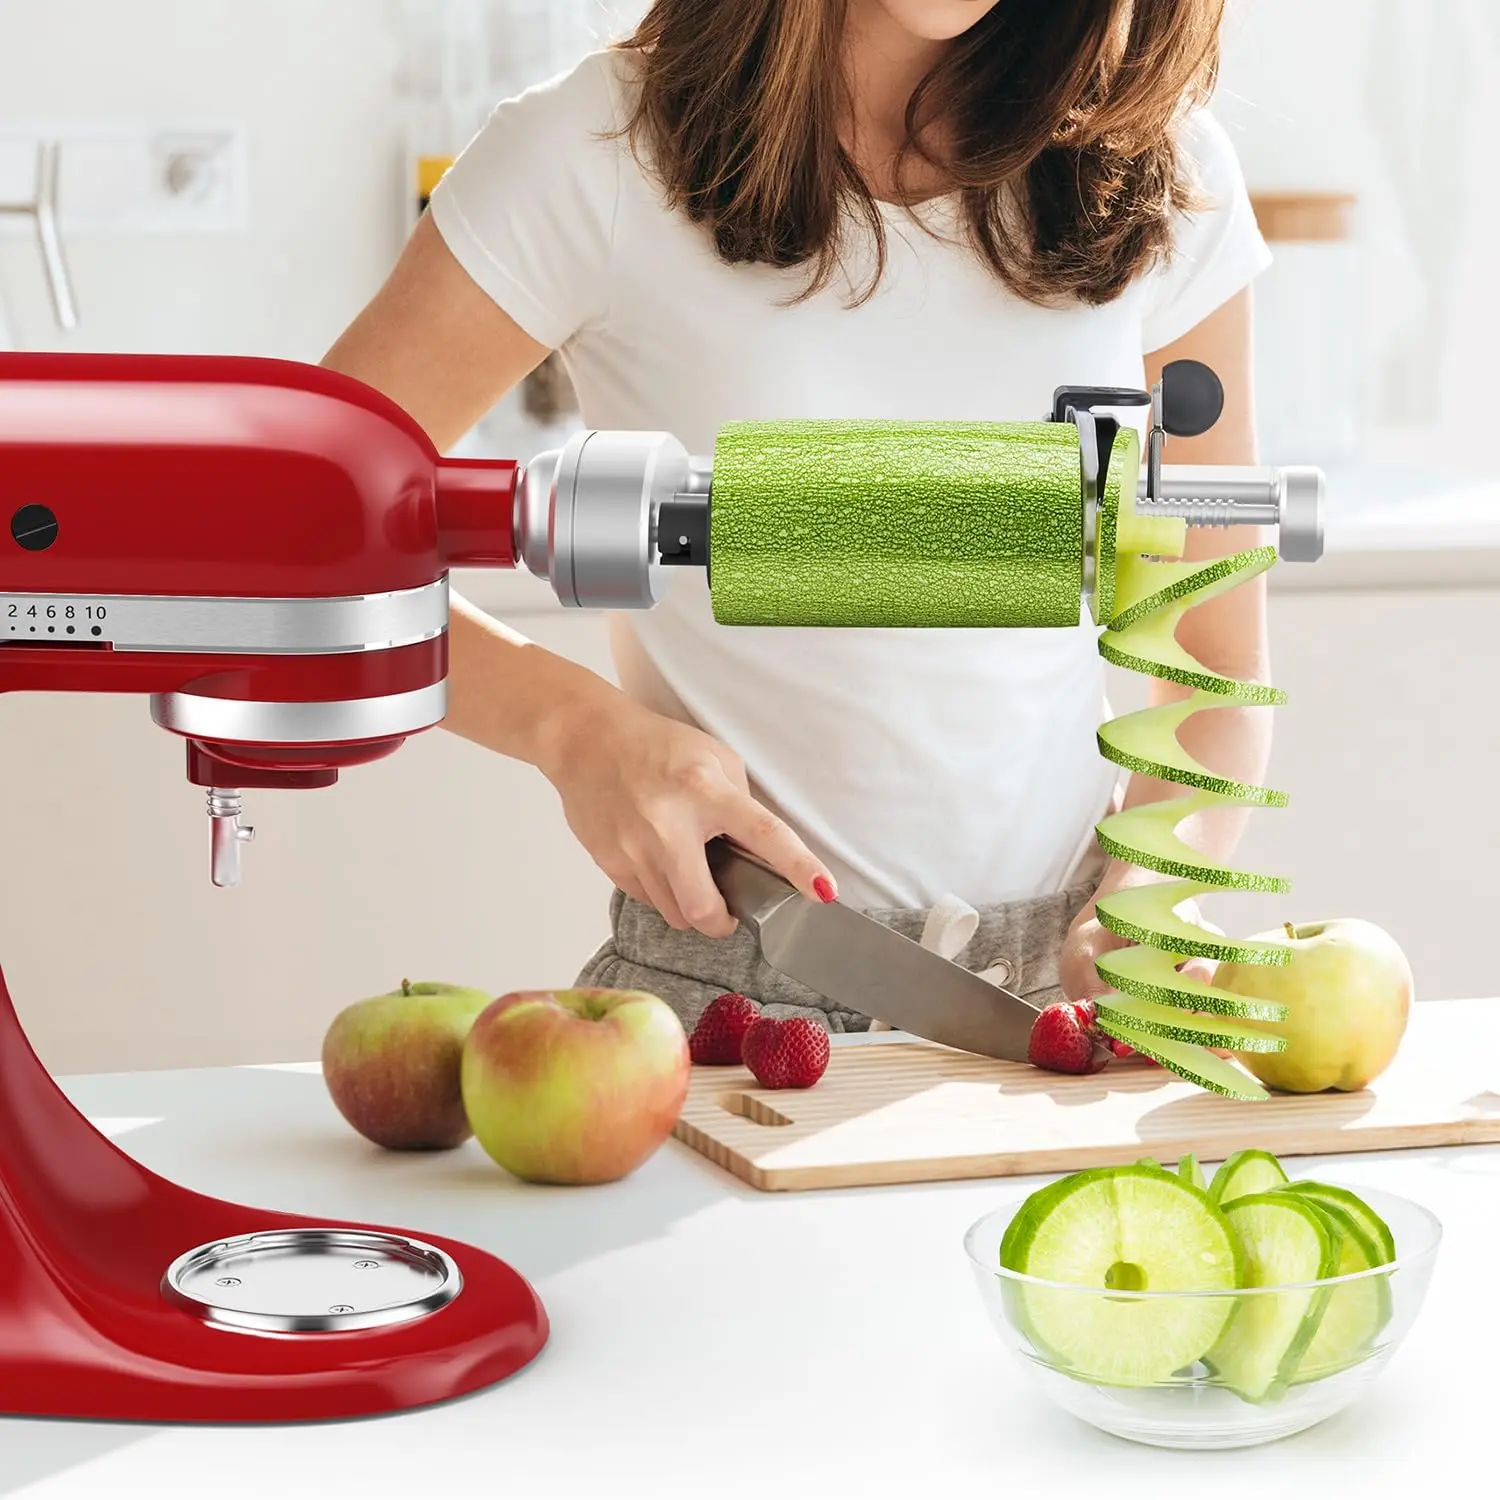 https://ae01.alicdn.com/kf/S76c6b084cd924bc58b713223bcc1a96ak/Spiralizer-Attachment-Compatible-with-KitchenAid-Stand-Mixer-Comes-with-Peel-Core-and-Slice-Not-KitchenAid-Brand.jpg